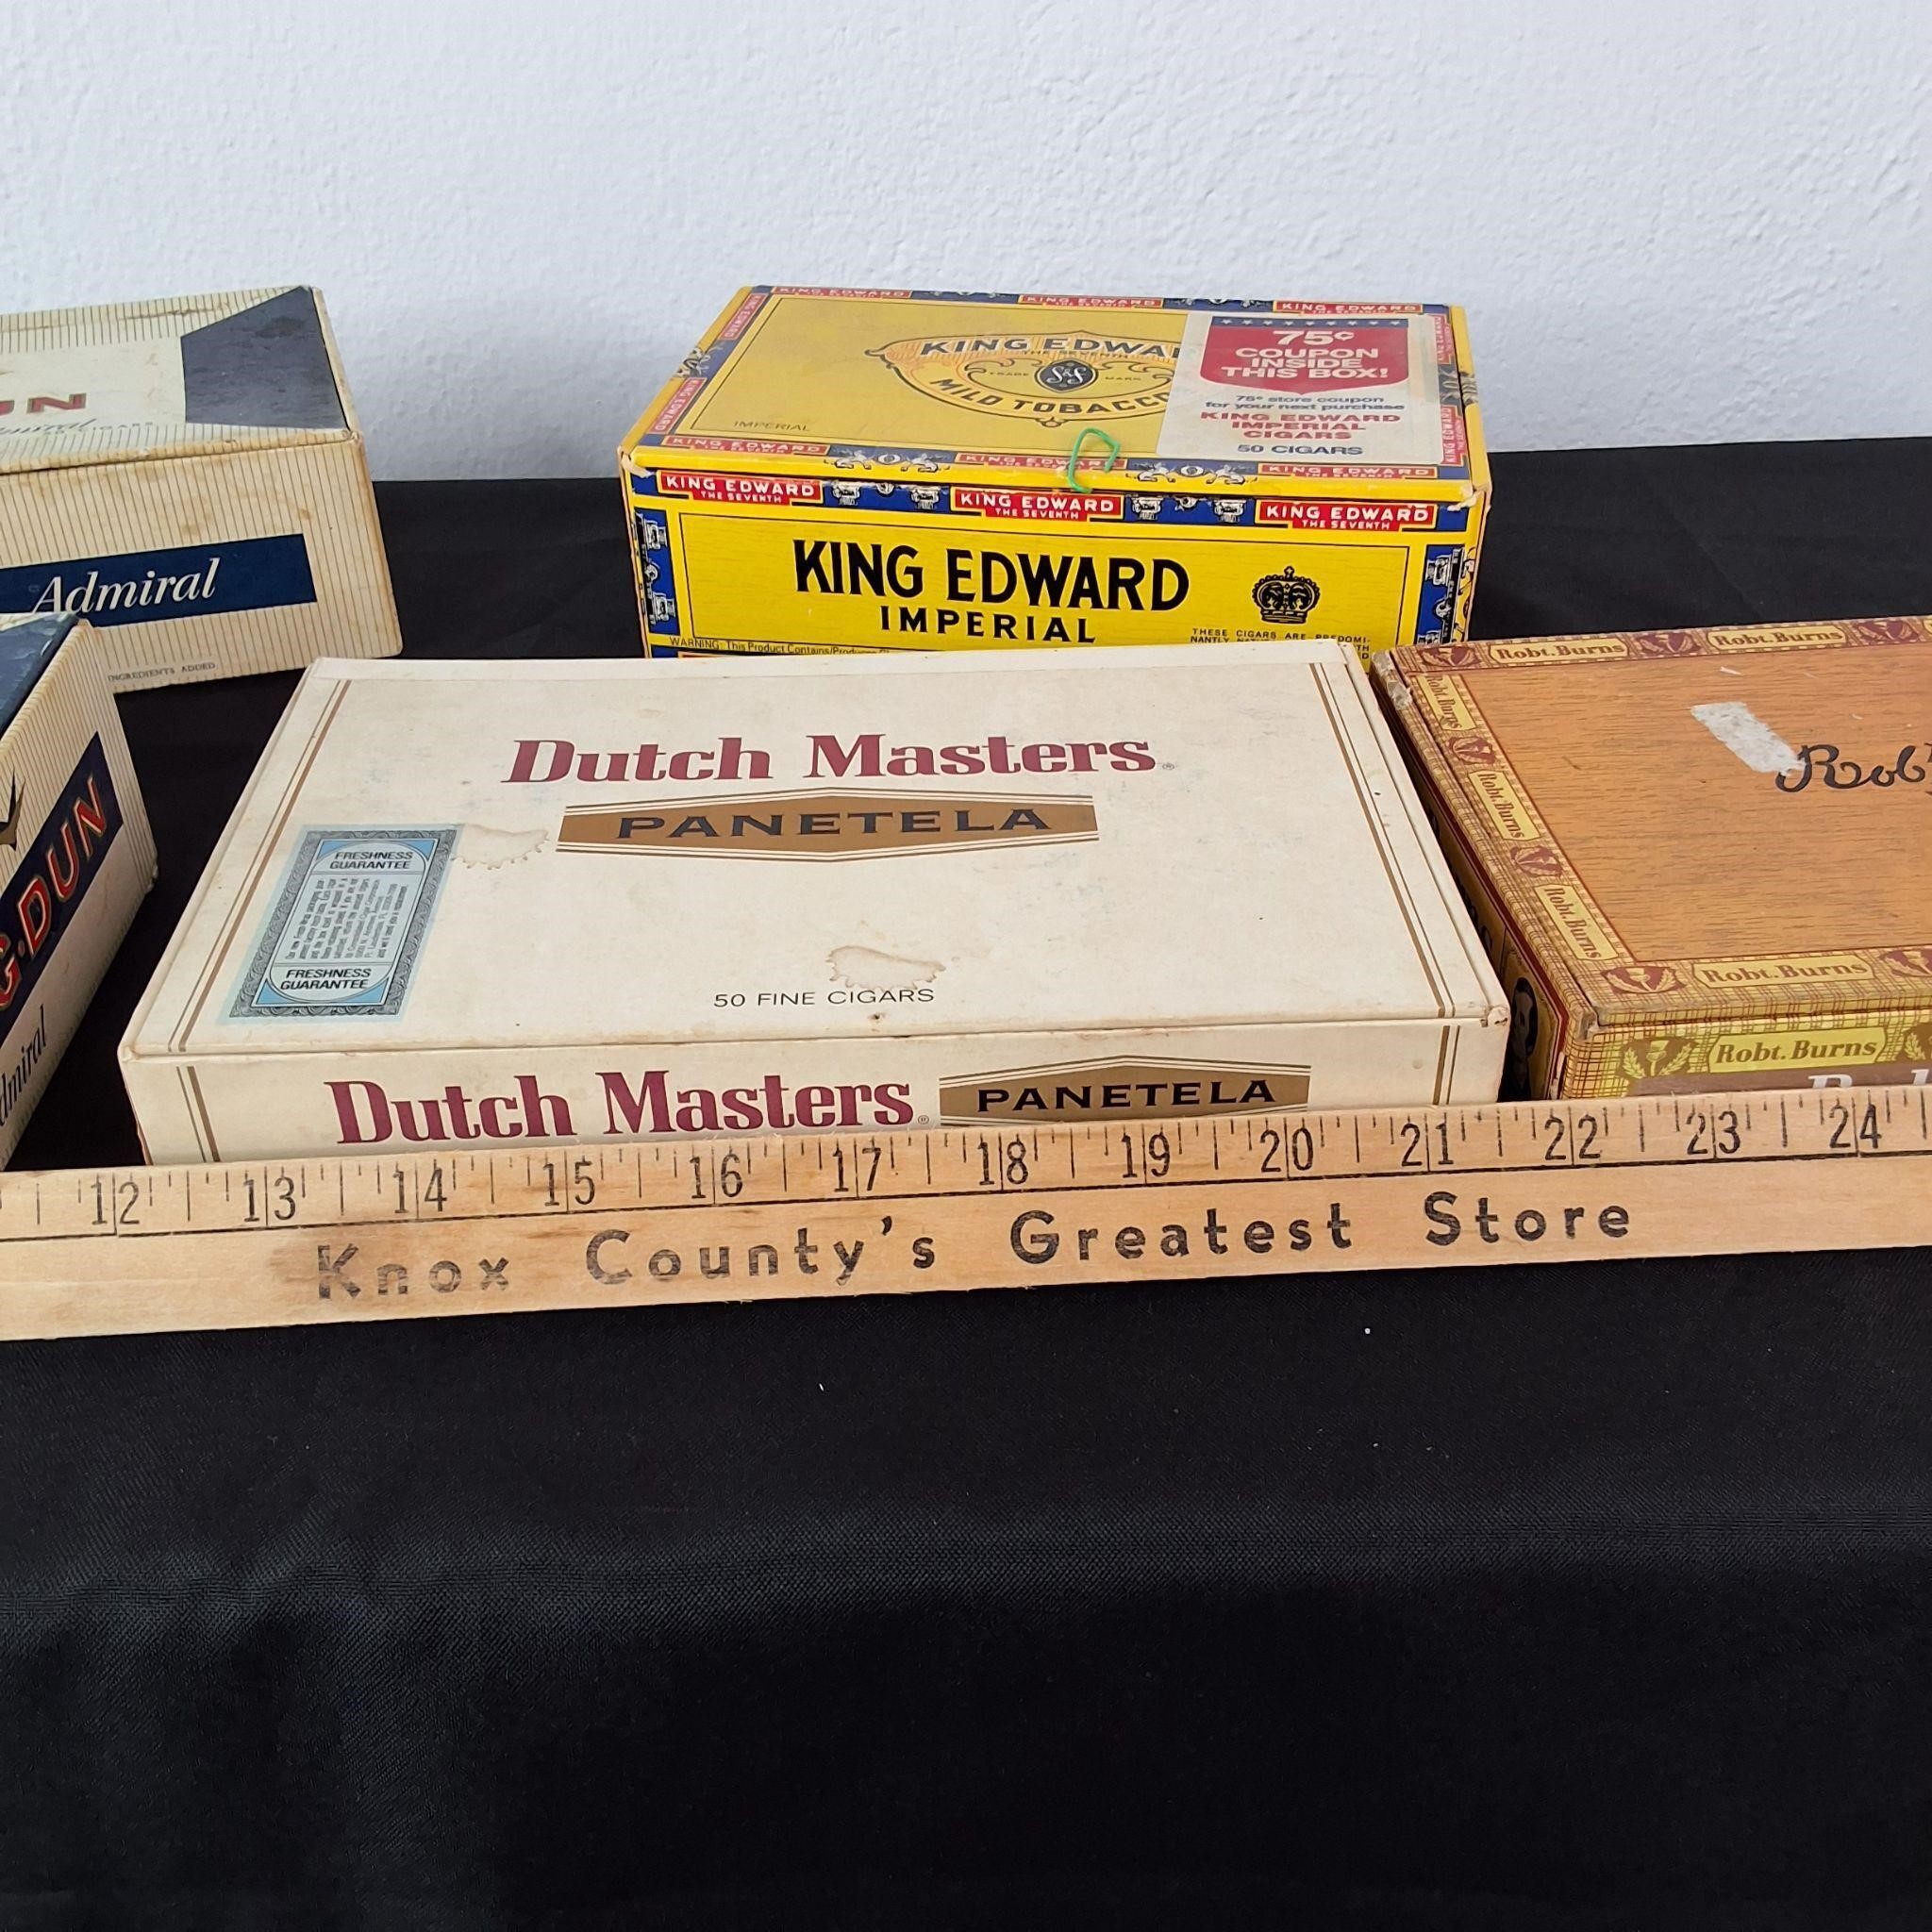 CIGAR BOXES AND VINTAGE ADVERTISING